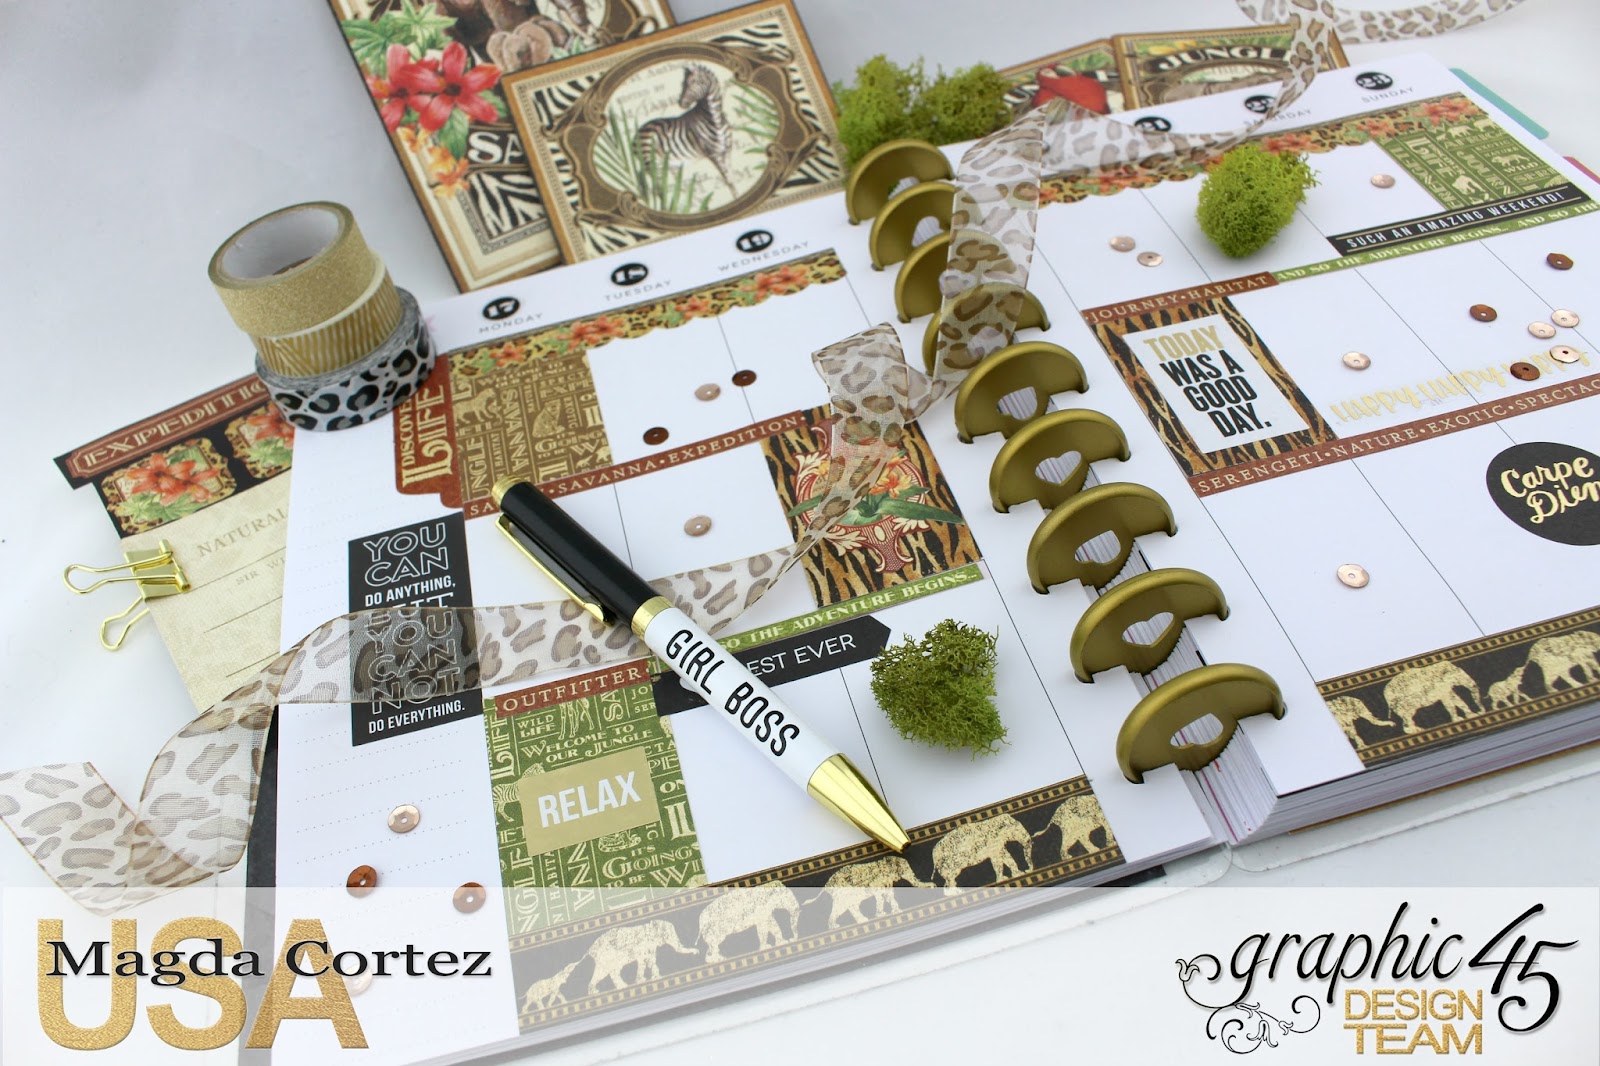 My JULY G45 Planner,Safari Adventure By Magda Cortez, Product by G45, Photo 16 of 20.jpg